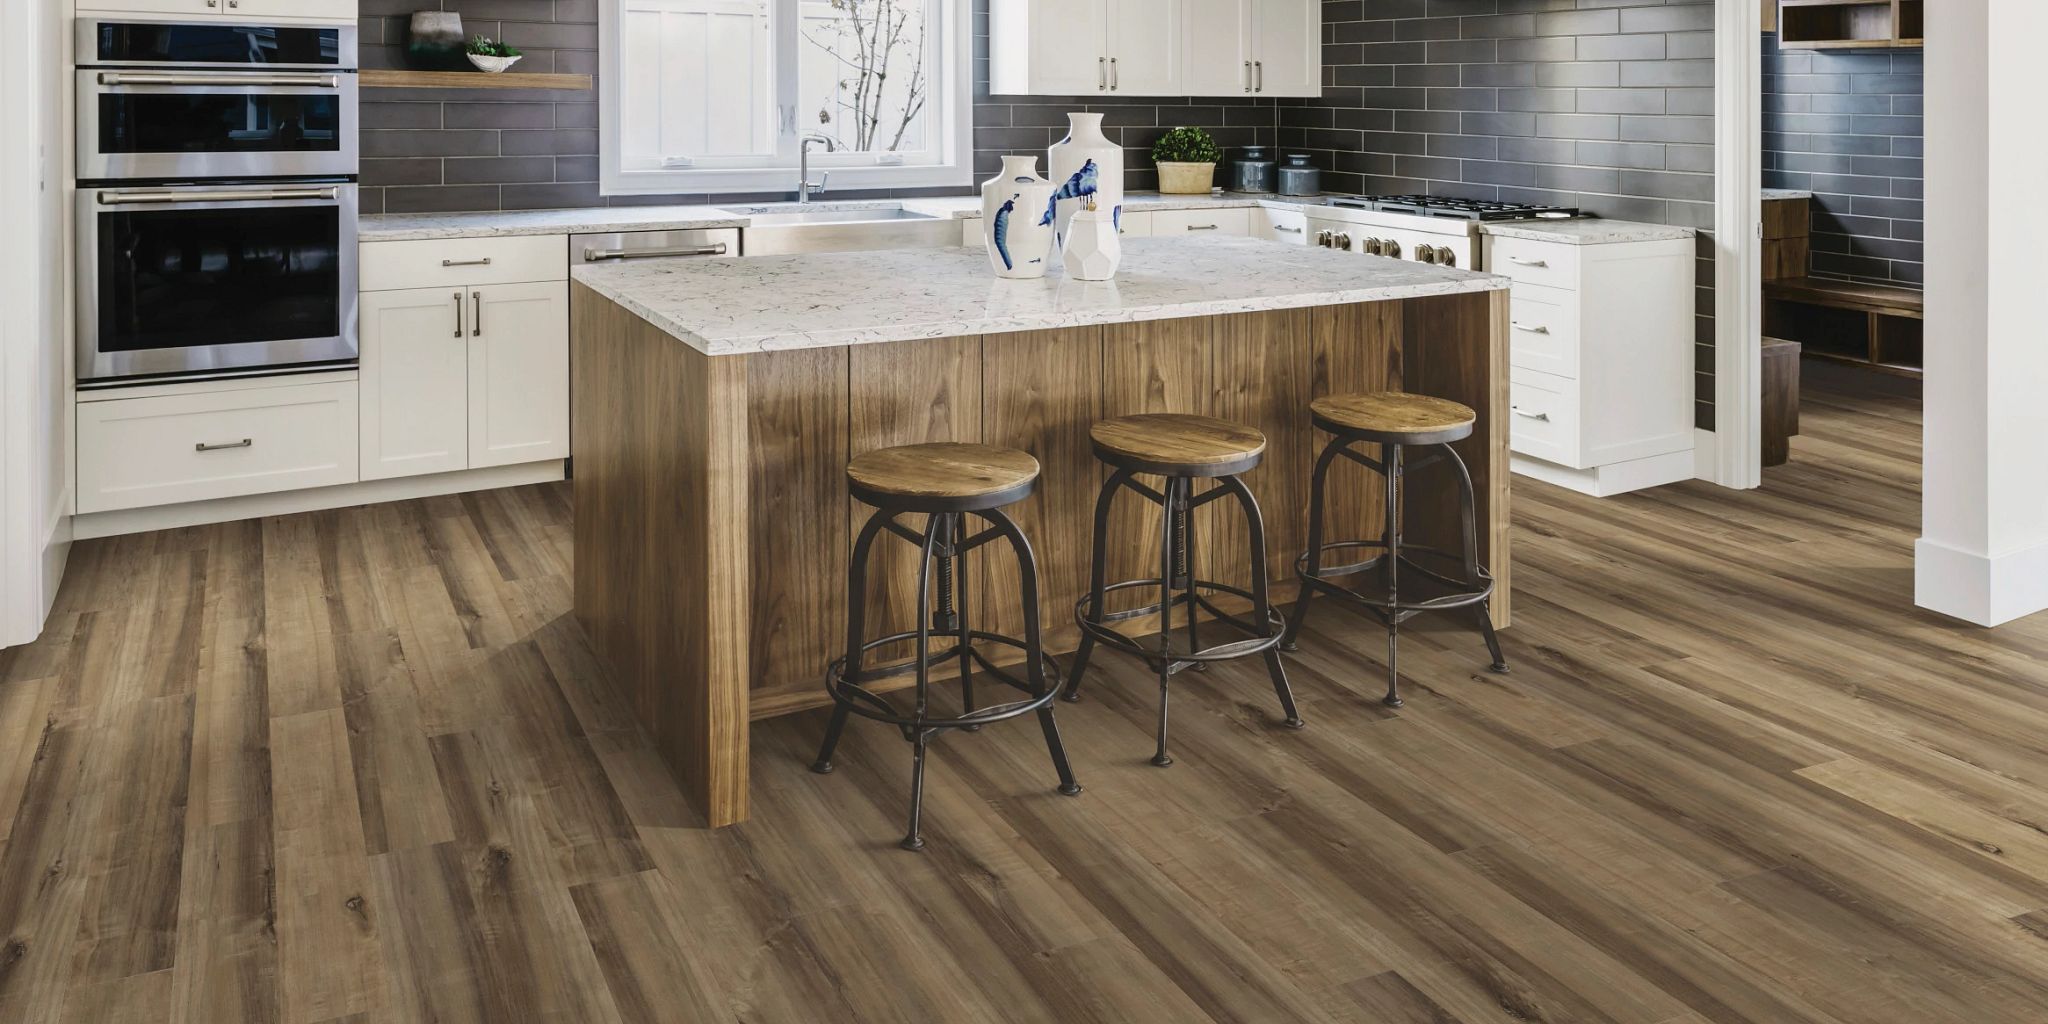 Harwood vs Laminate Flooring: The Pros and Cons - MYMOVE